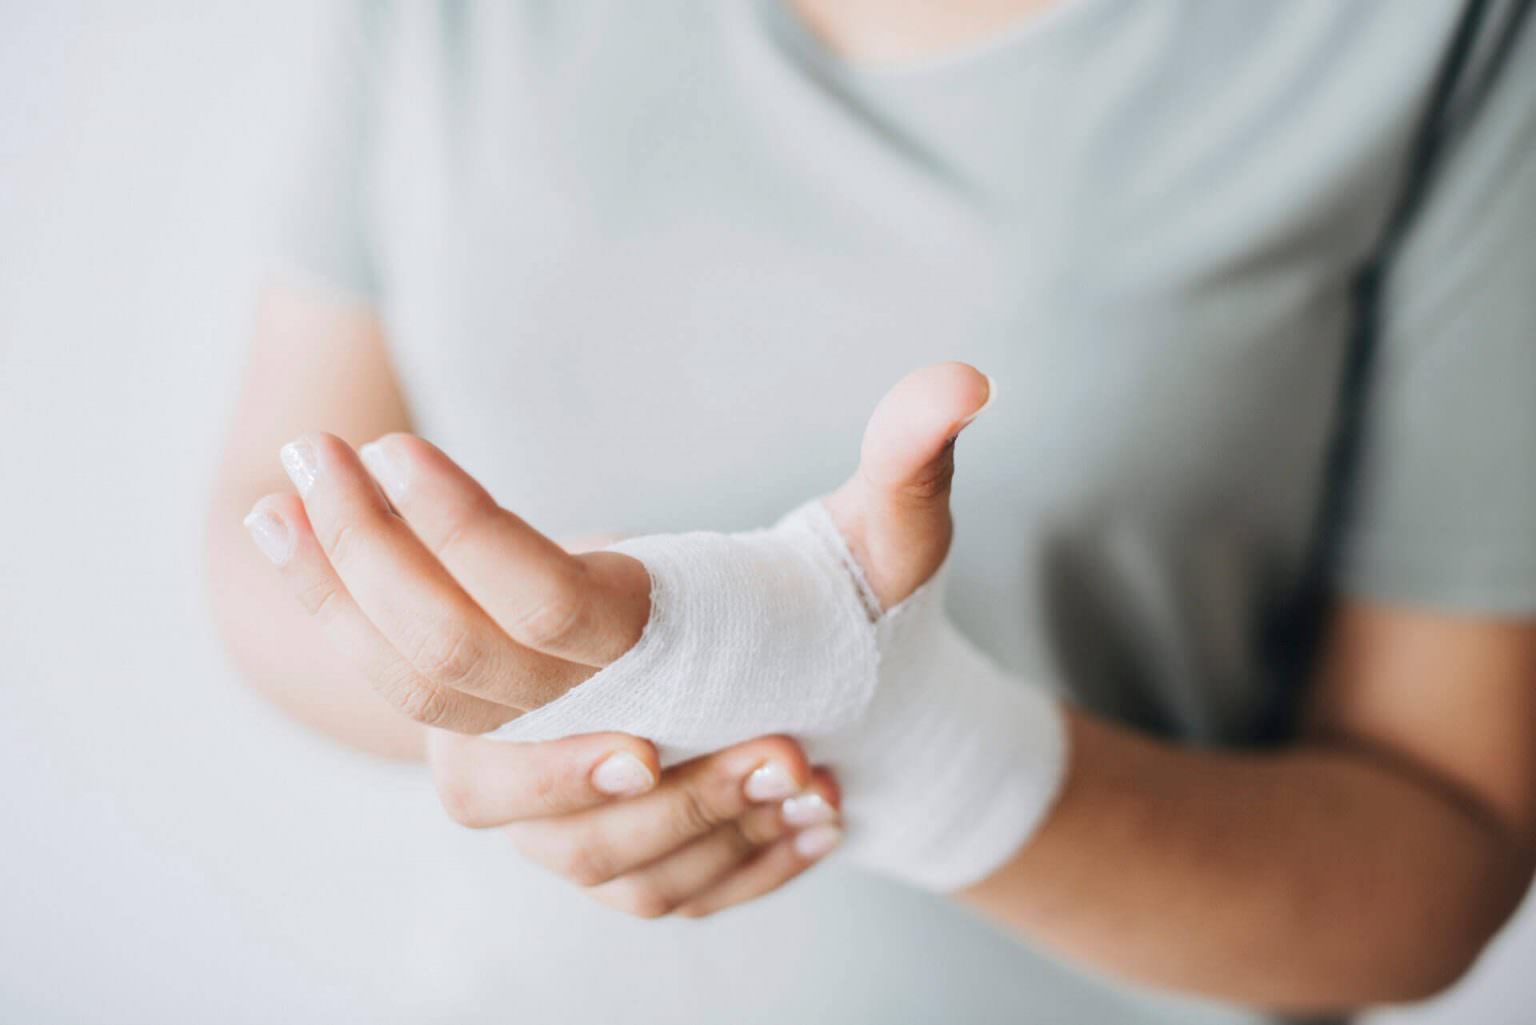 Hand Injury Services ProFizix Physical Therapy and Wellness